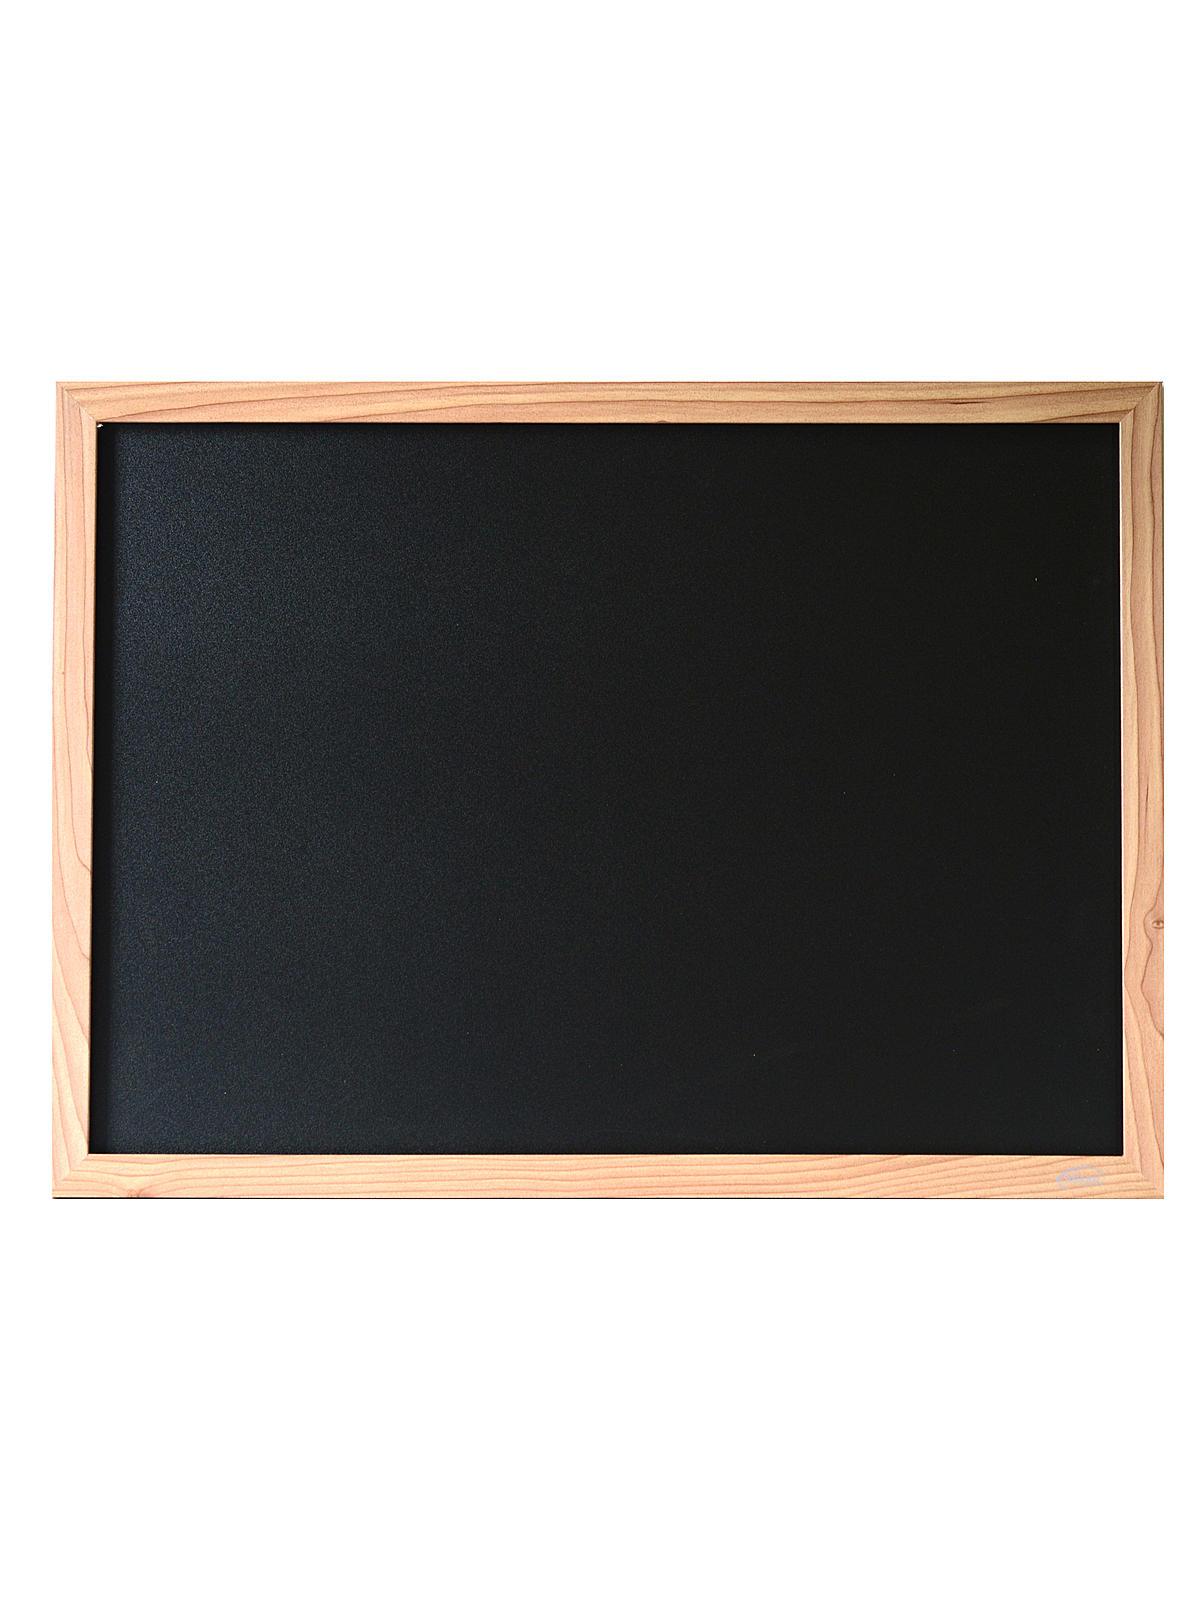 The Board Dudes 17 x 23 Chalk Board with Oak Wood Style Frame